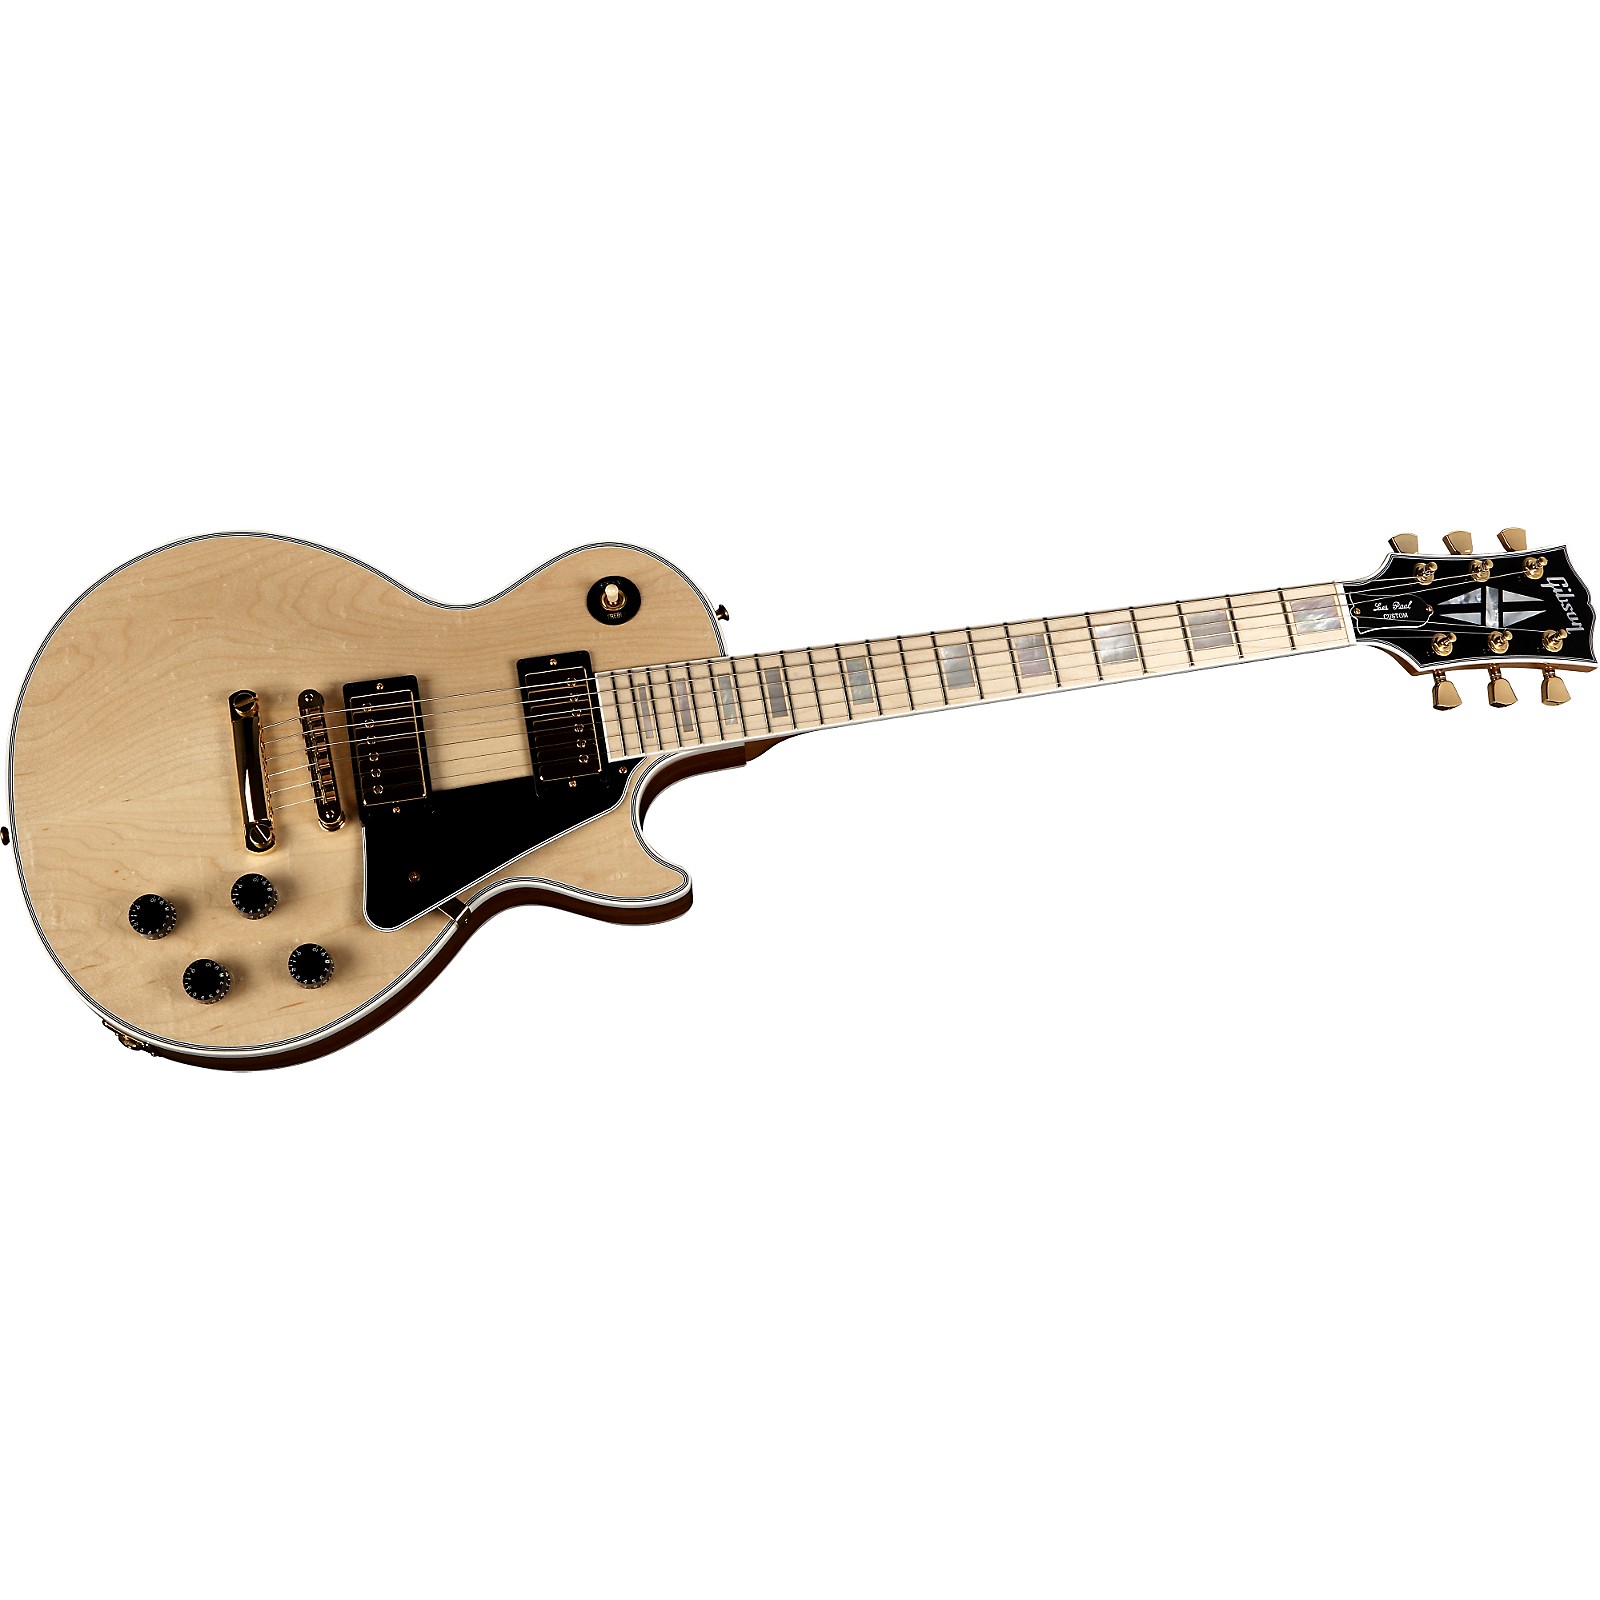 Gibson Custom Les Paul Custom Natural Finish Electric Guitar With Maple Fretboard Musicians